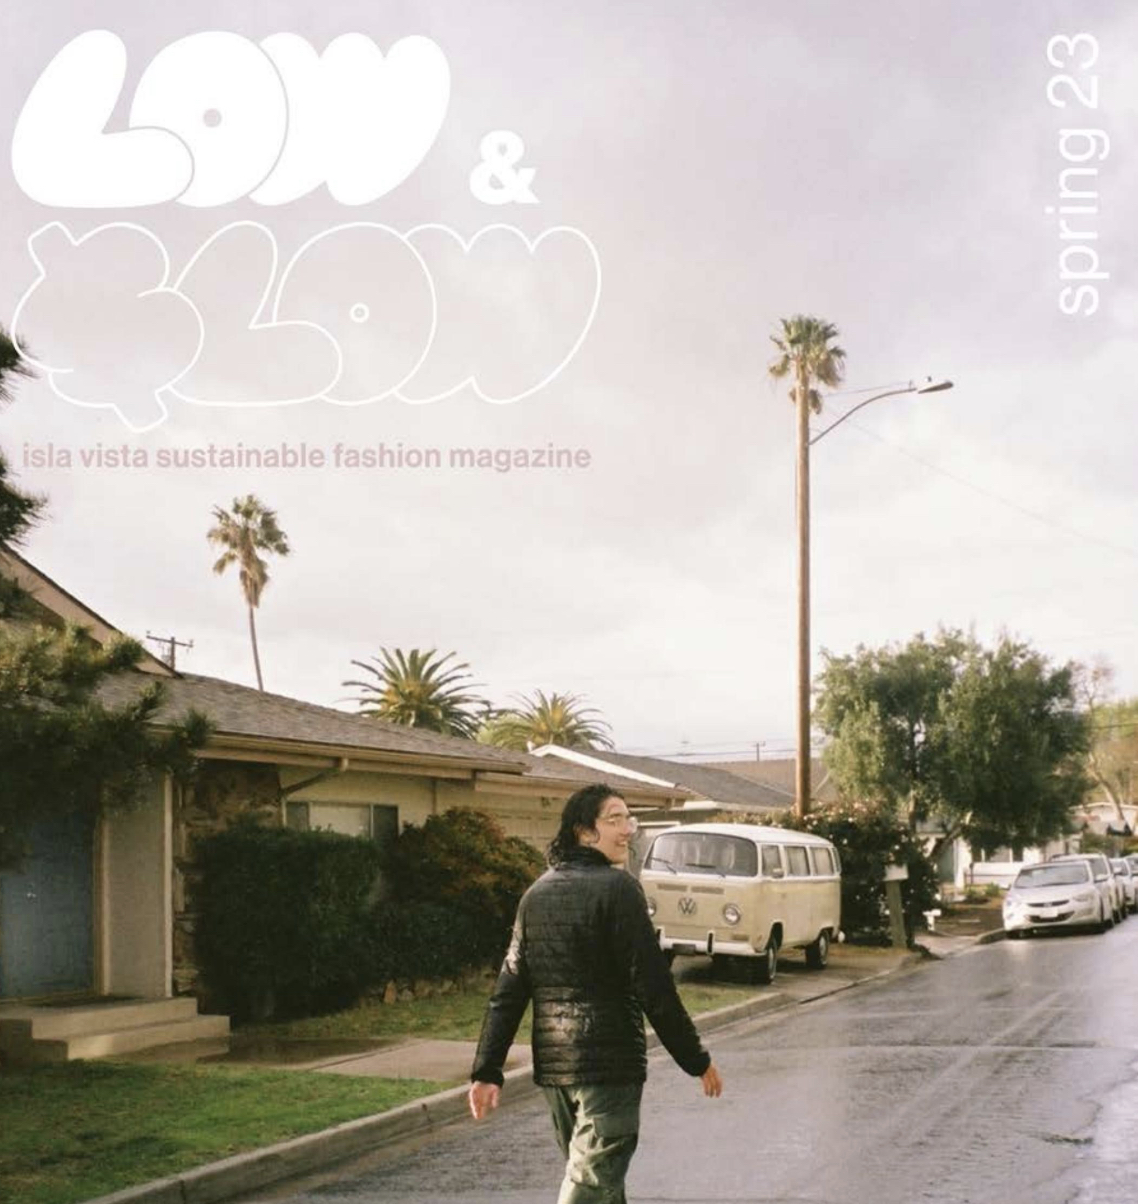 The cover of Low and Slow issue